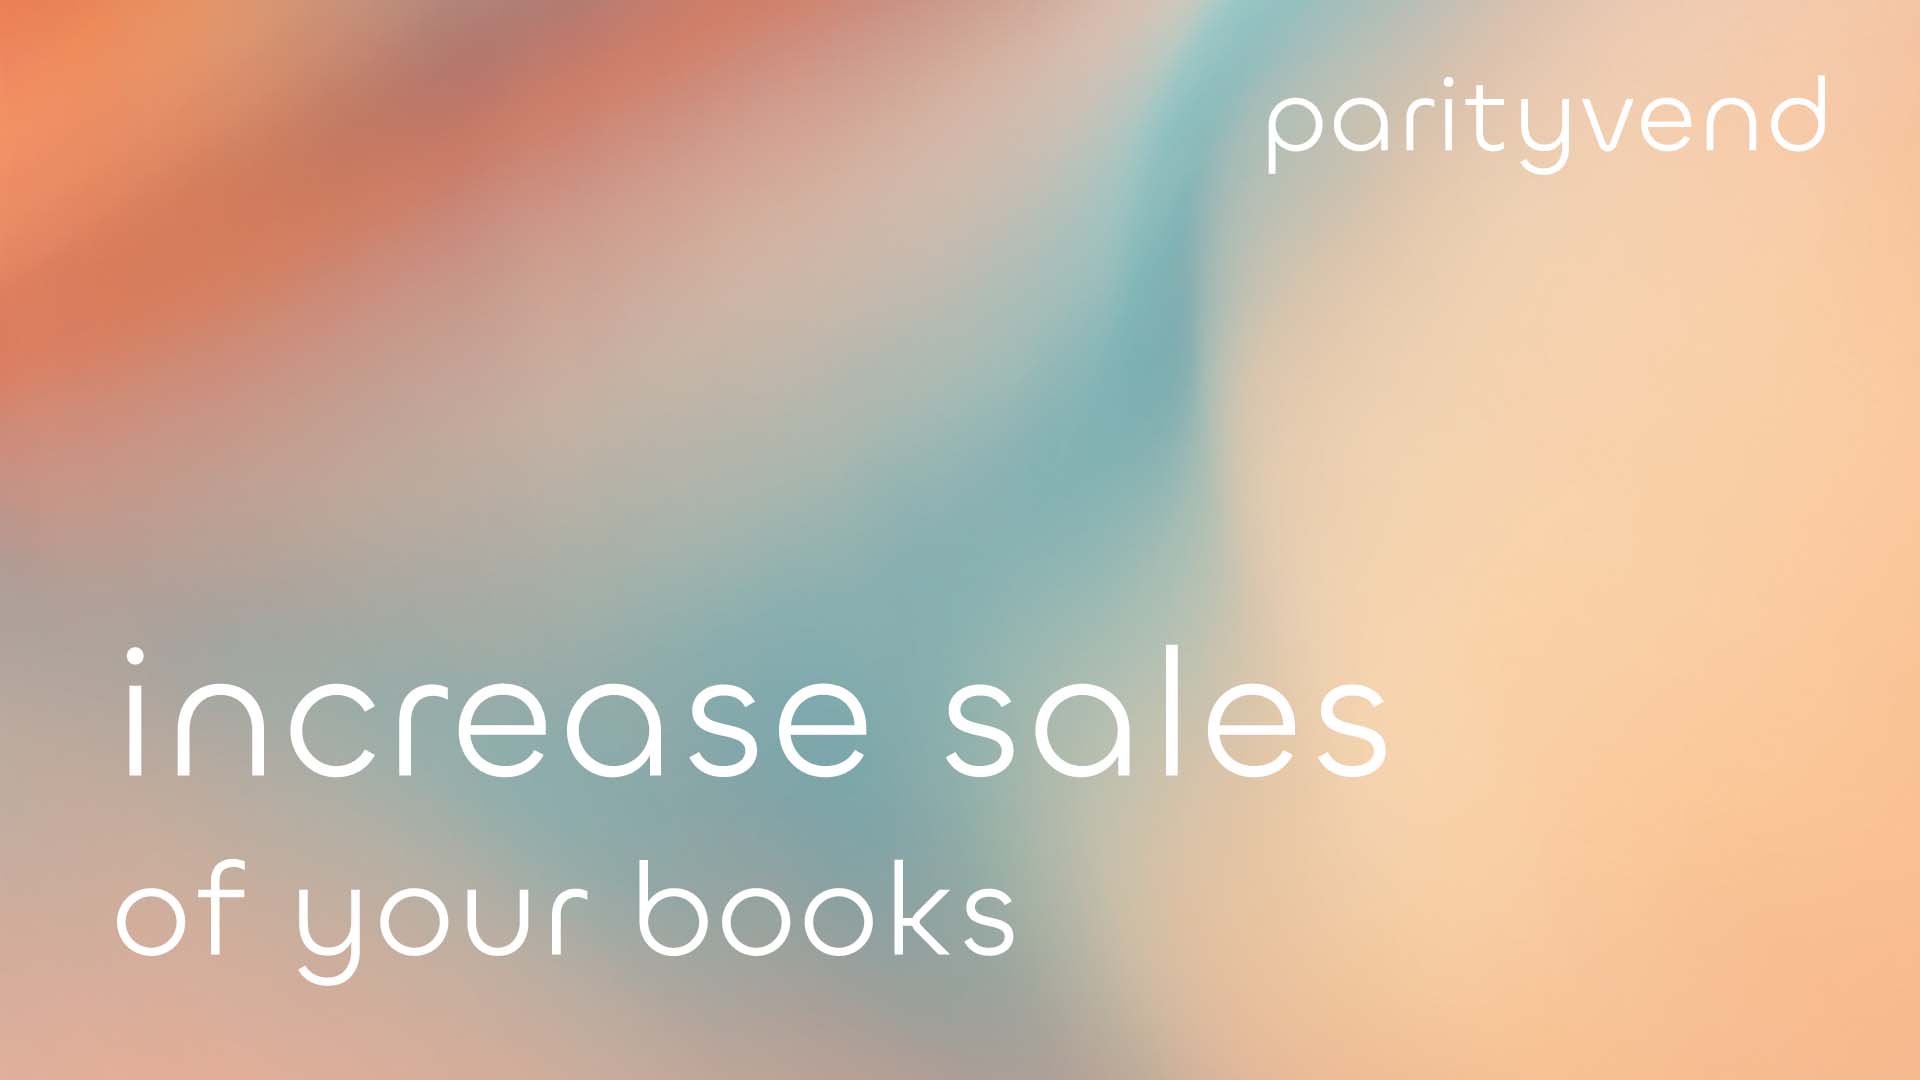 <span style="display: inline-block; margin-bottom: 0.5rem; font-weight: 500;">How to increase sales of your books directly on your website</span> - Insider Strategies for Authors